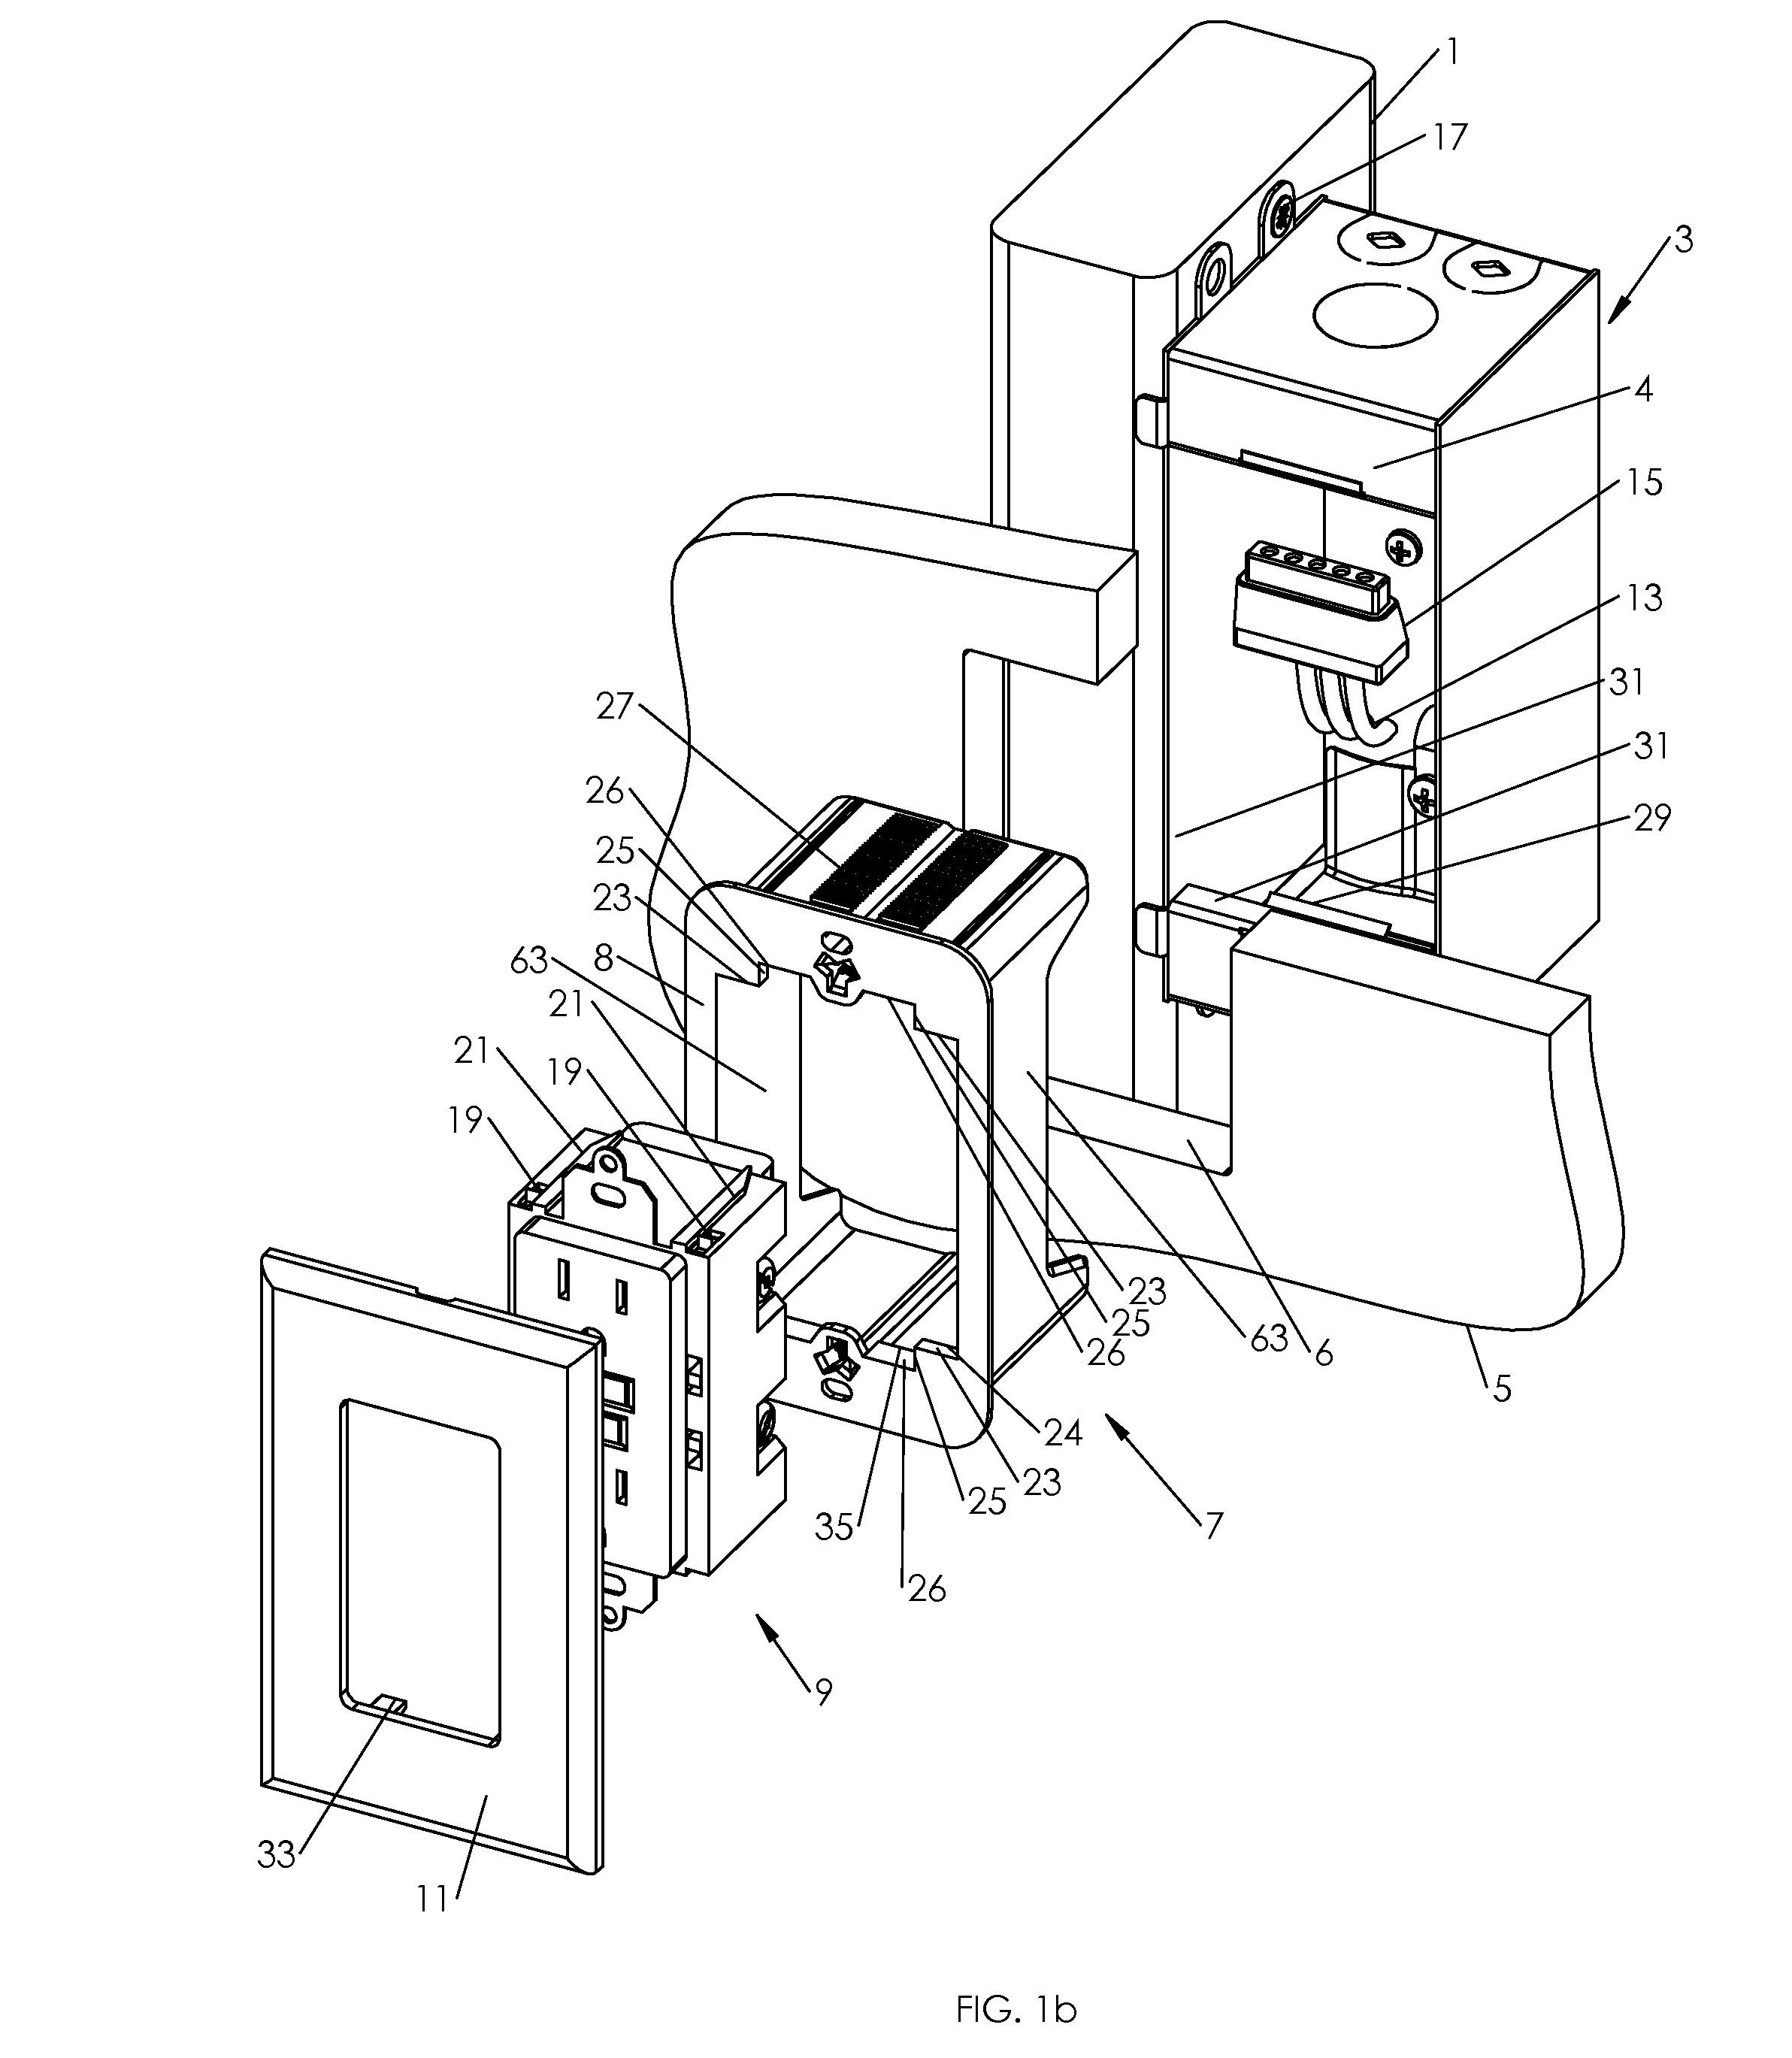 Electrical box and sleeve assembly